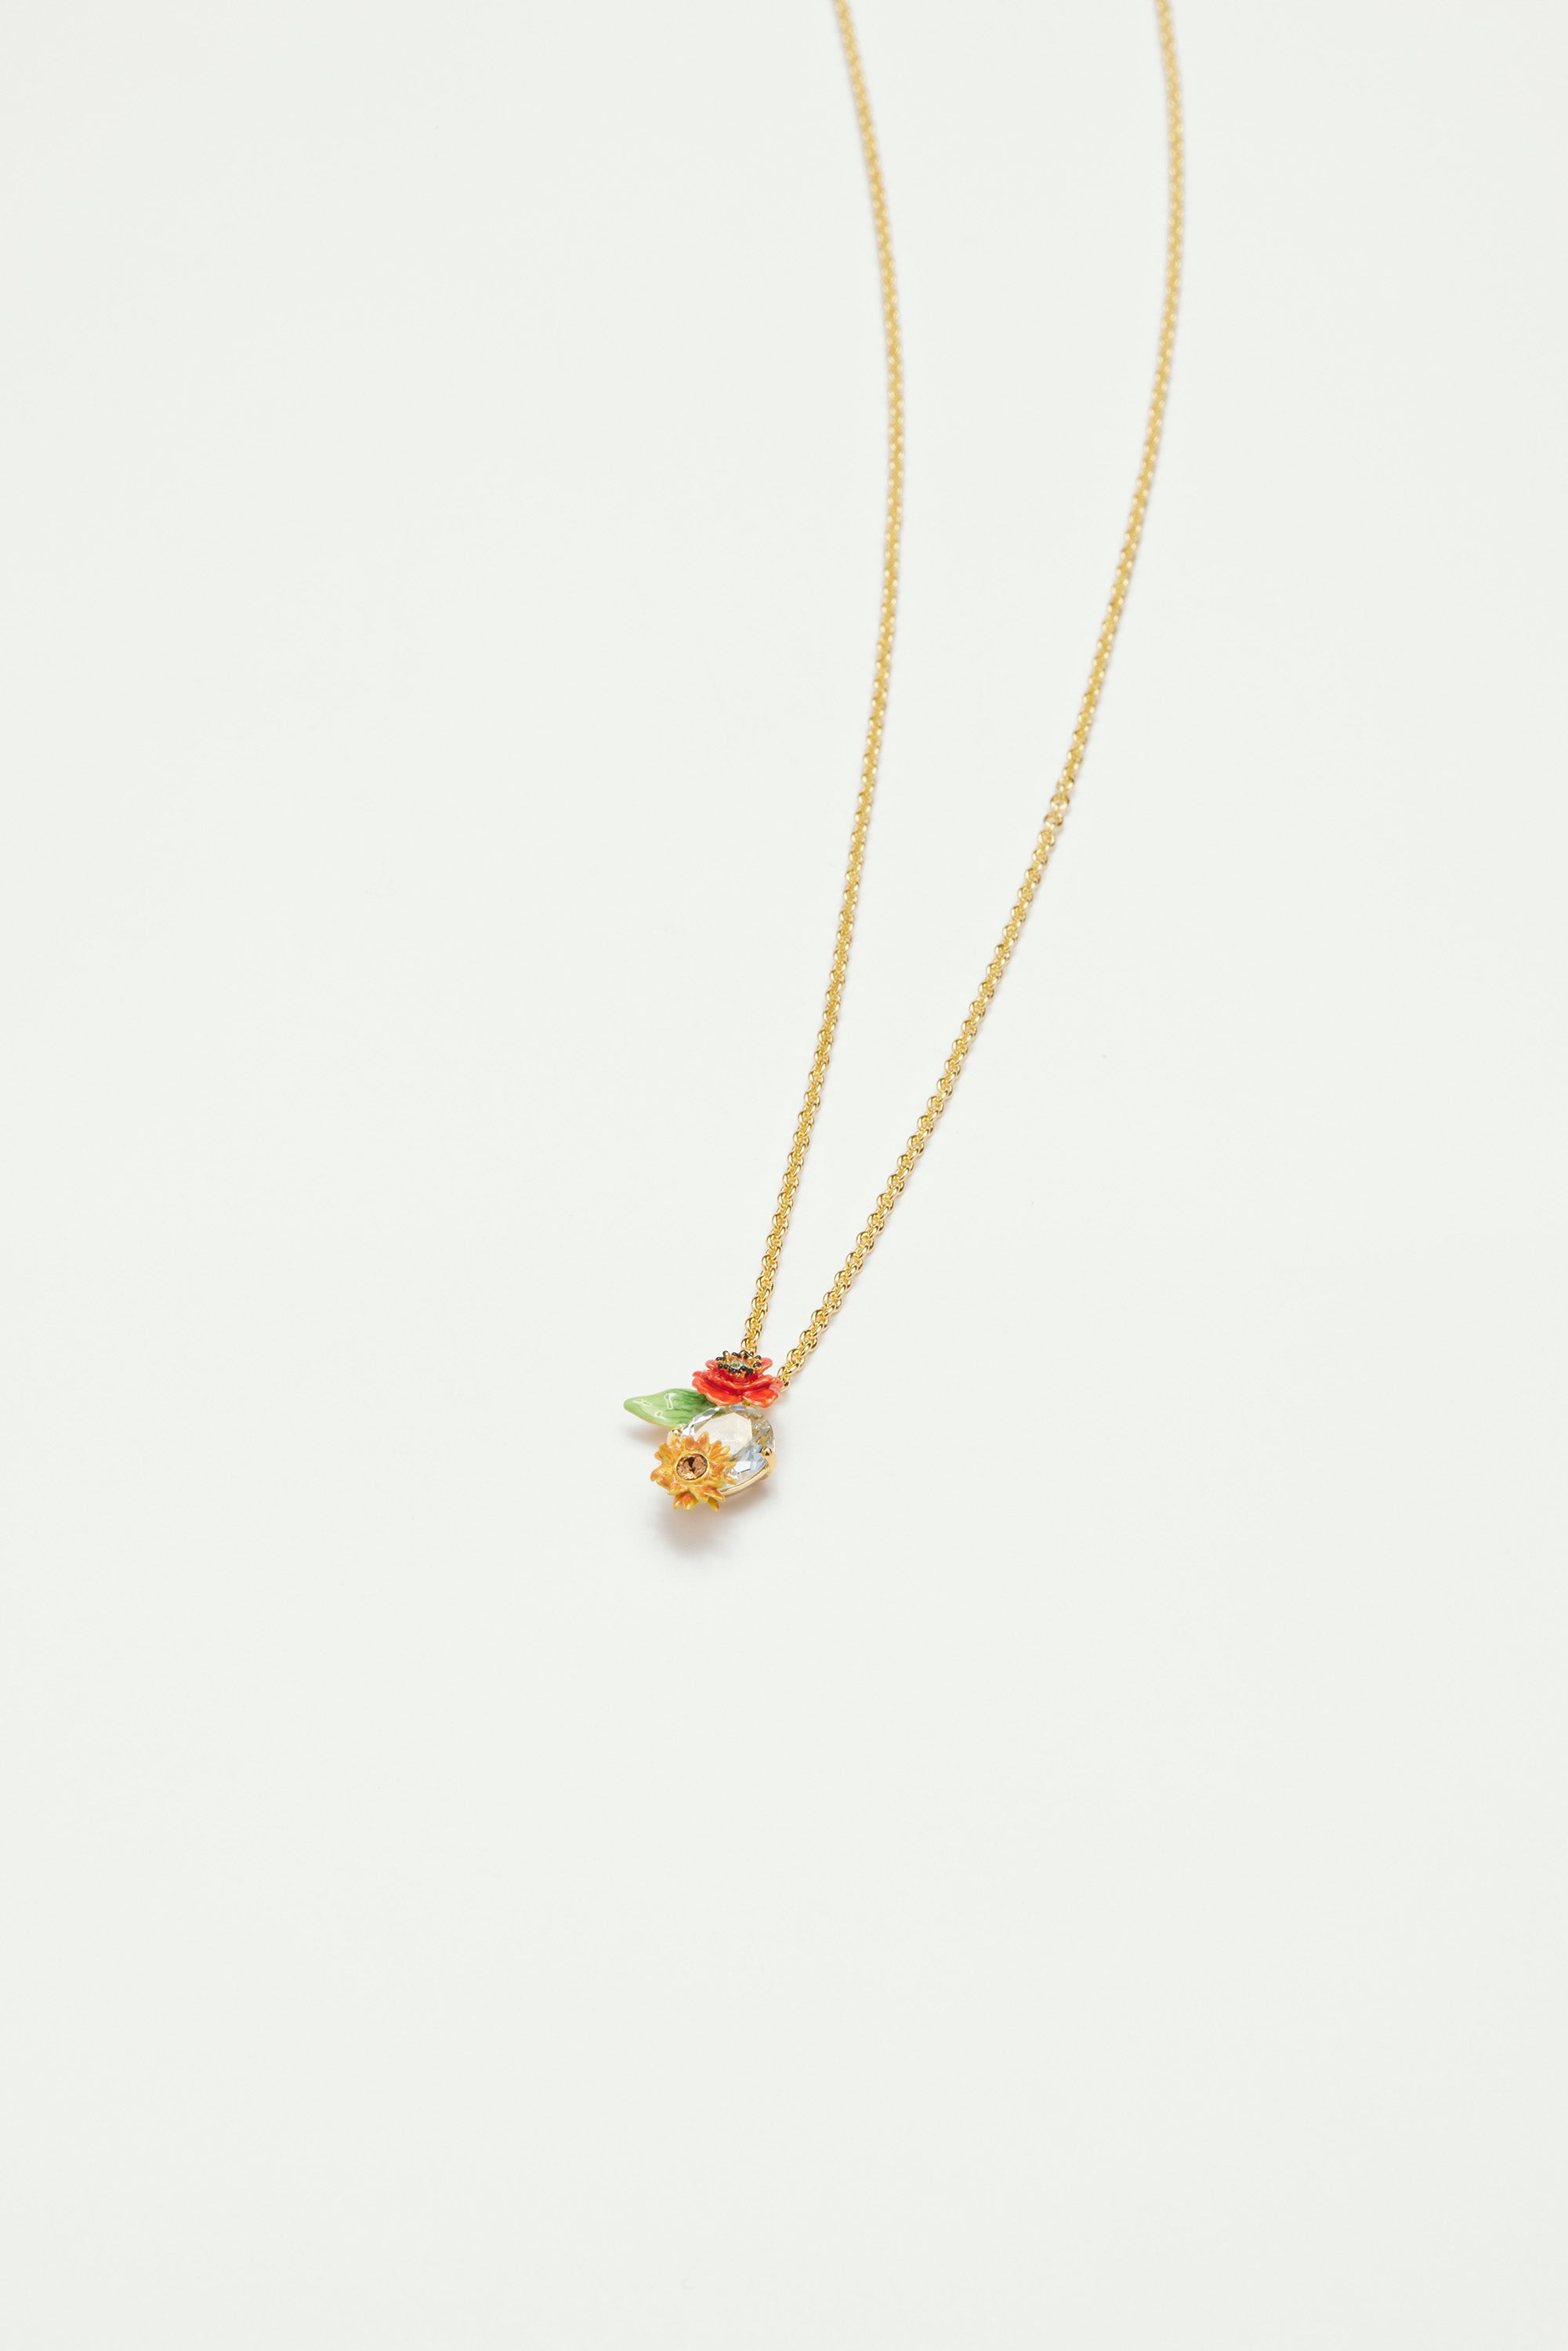 Wildflower and round stone pendant necklace